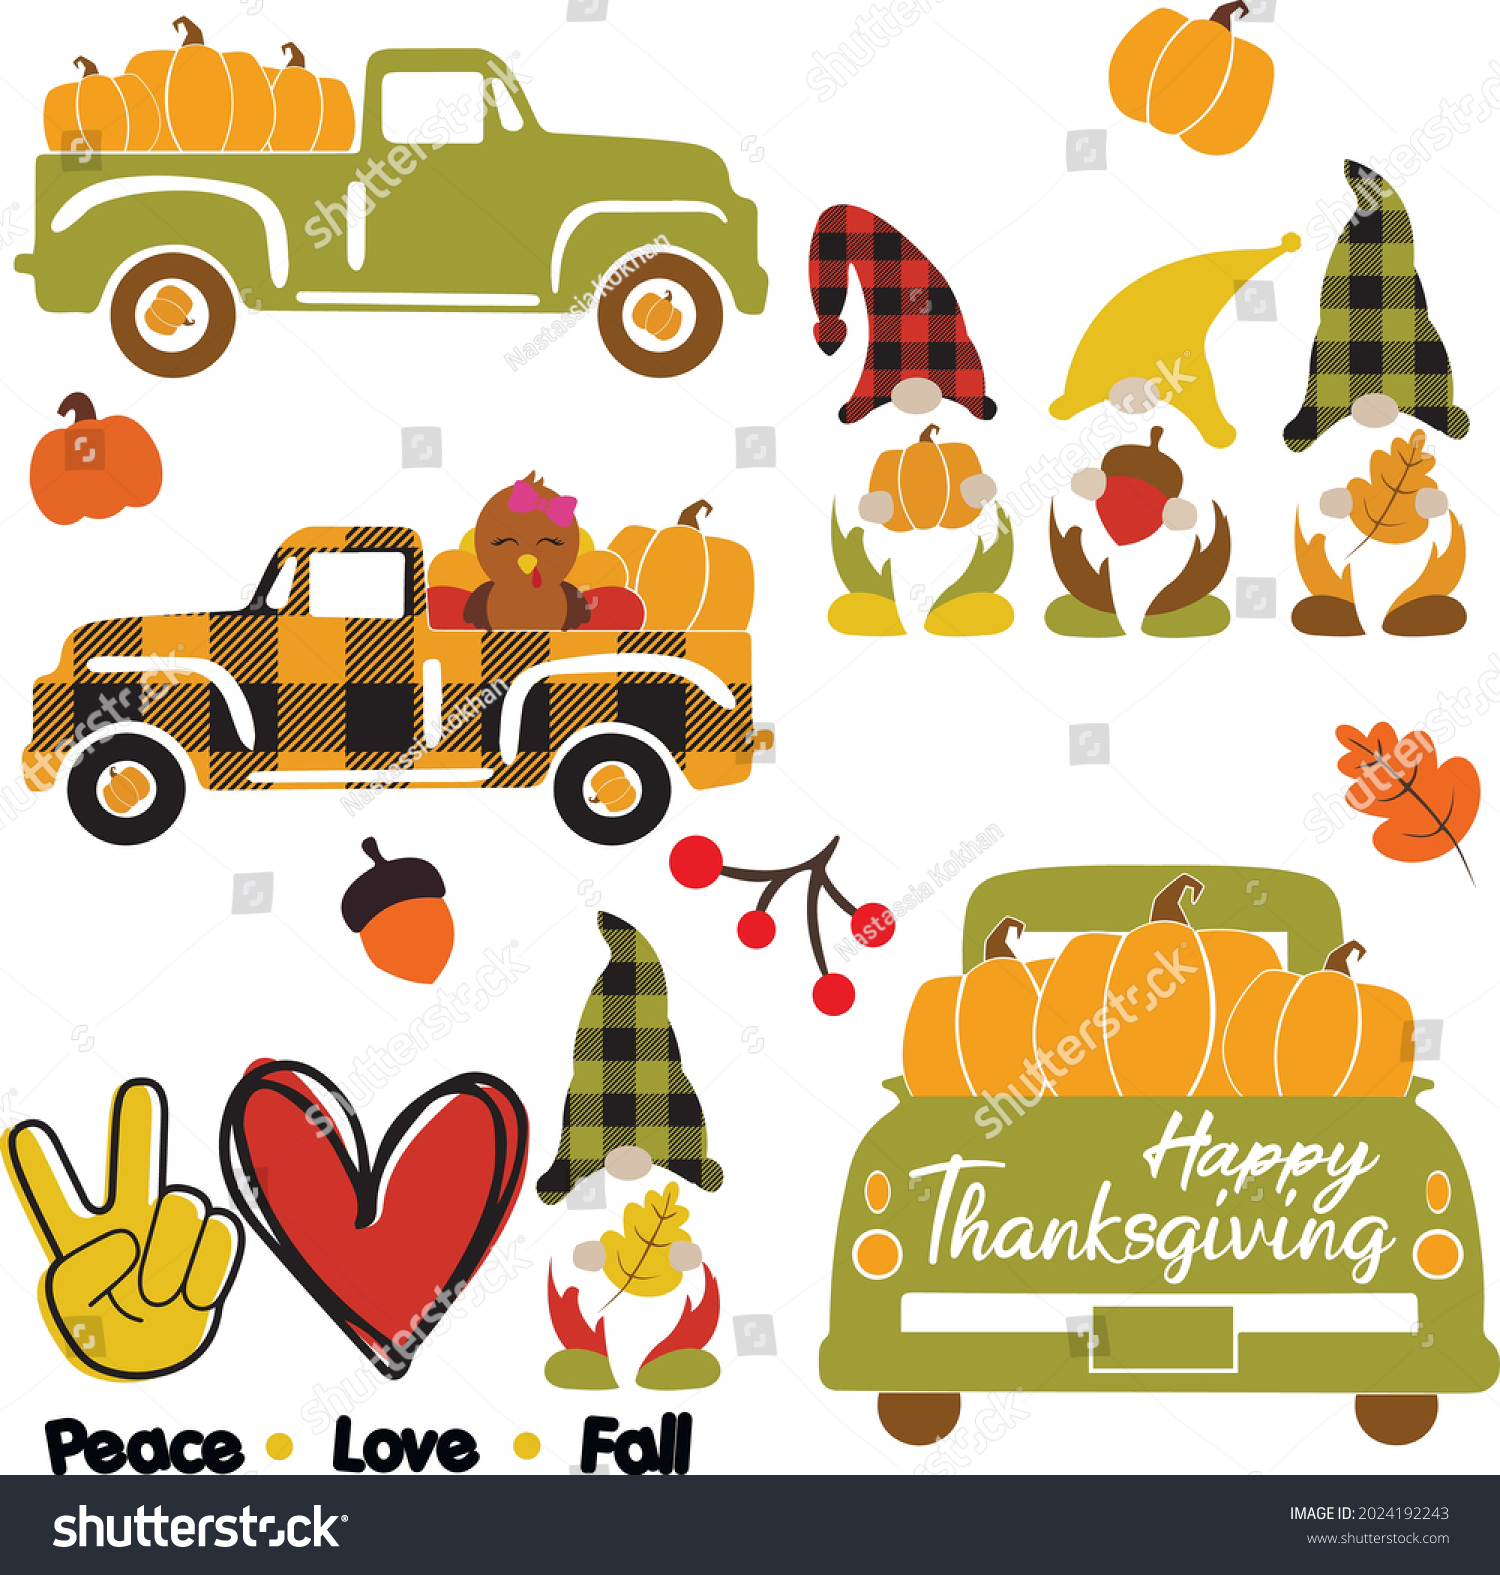 SVG of Thaksgiving bundle svg vector Illustration isolated on white background. Fall truck with pumpkin. Autumn gnomes with fall elements. Peace love fall shirt design. Happy thanksgiving decoration.  svg